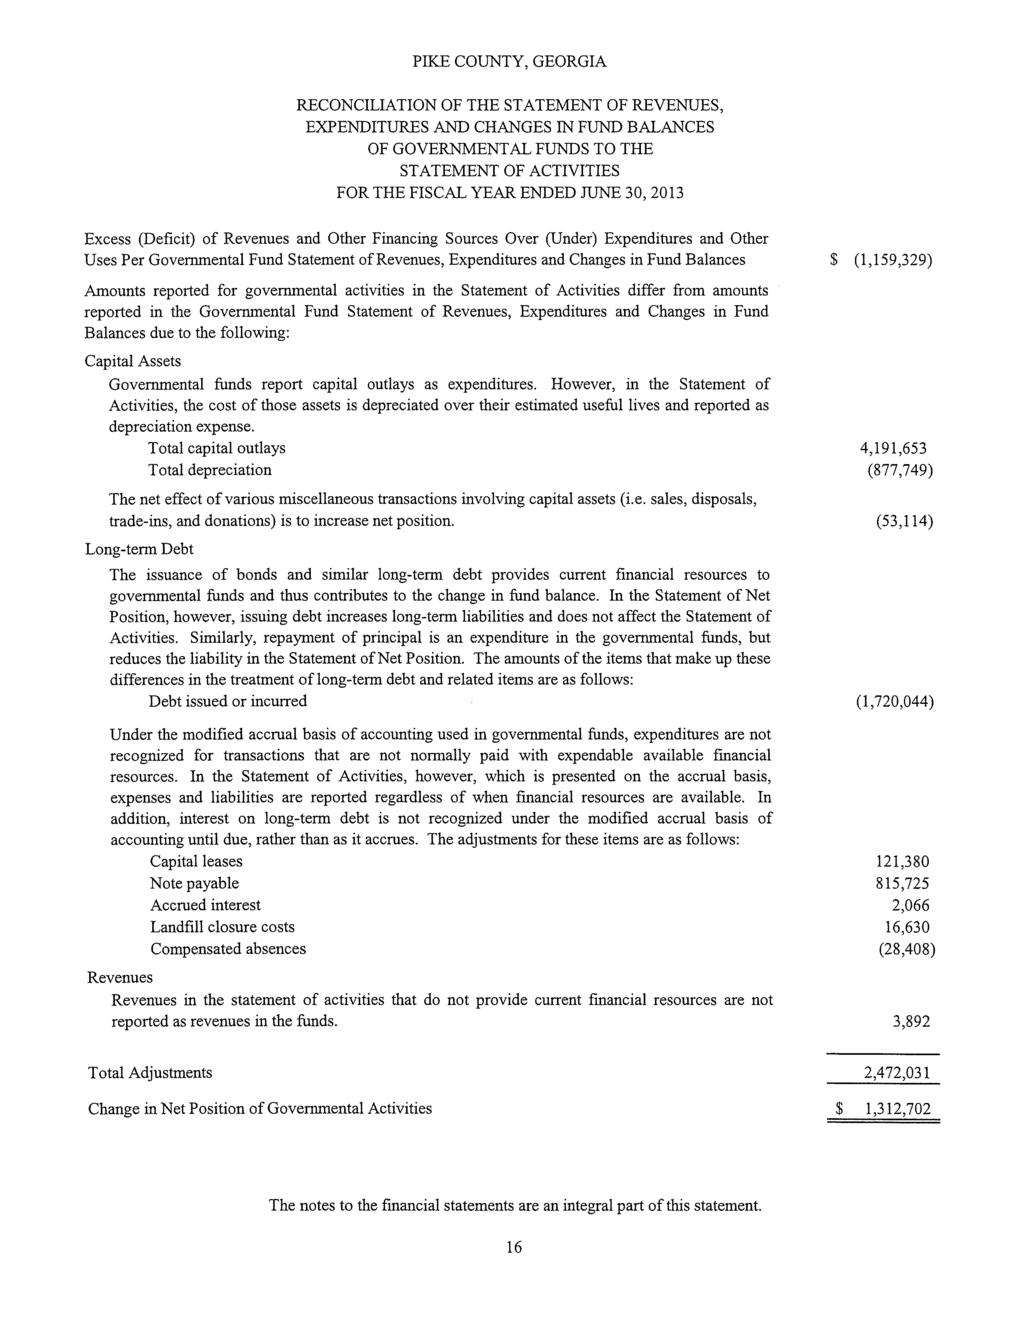 RECONCILIATION OF THE STATEMENT OF REVENUES, EXPENDITURES AND CHANGES TN FUND BALANCES OF GOVERNMENTAL FUNDS TO THE STATEMENT OF ACTIVITIES FOR THE FISCAL YEAR ENDED JUNE 30, 2013 Excess (Deficit) of